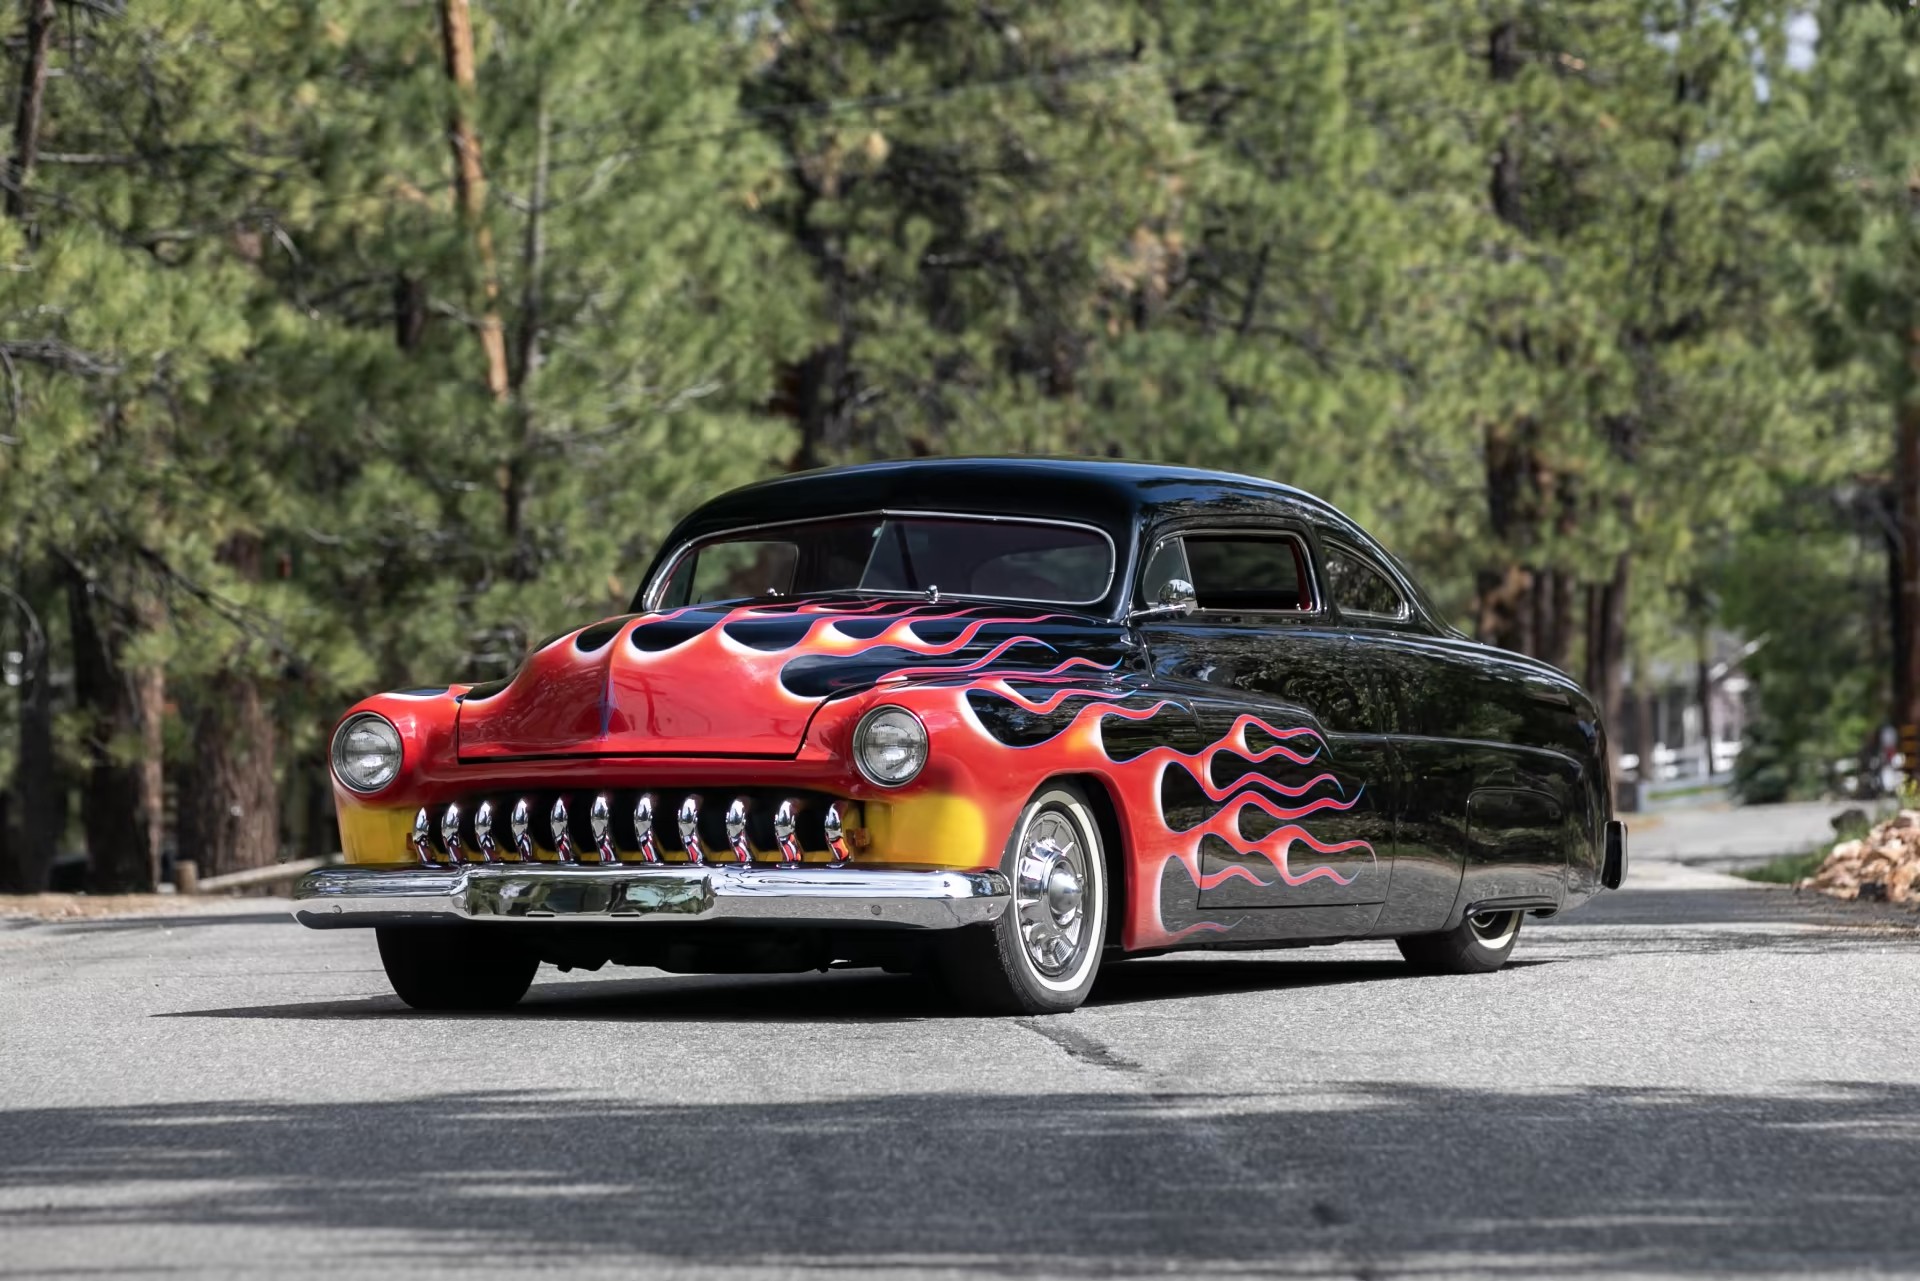 Dick Dean-Built 1951 Mercury Customs Owned by Looney Tunes' Voice Actors to be Auctioned at Monterey